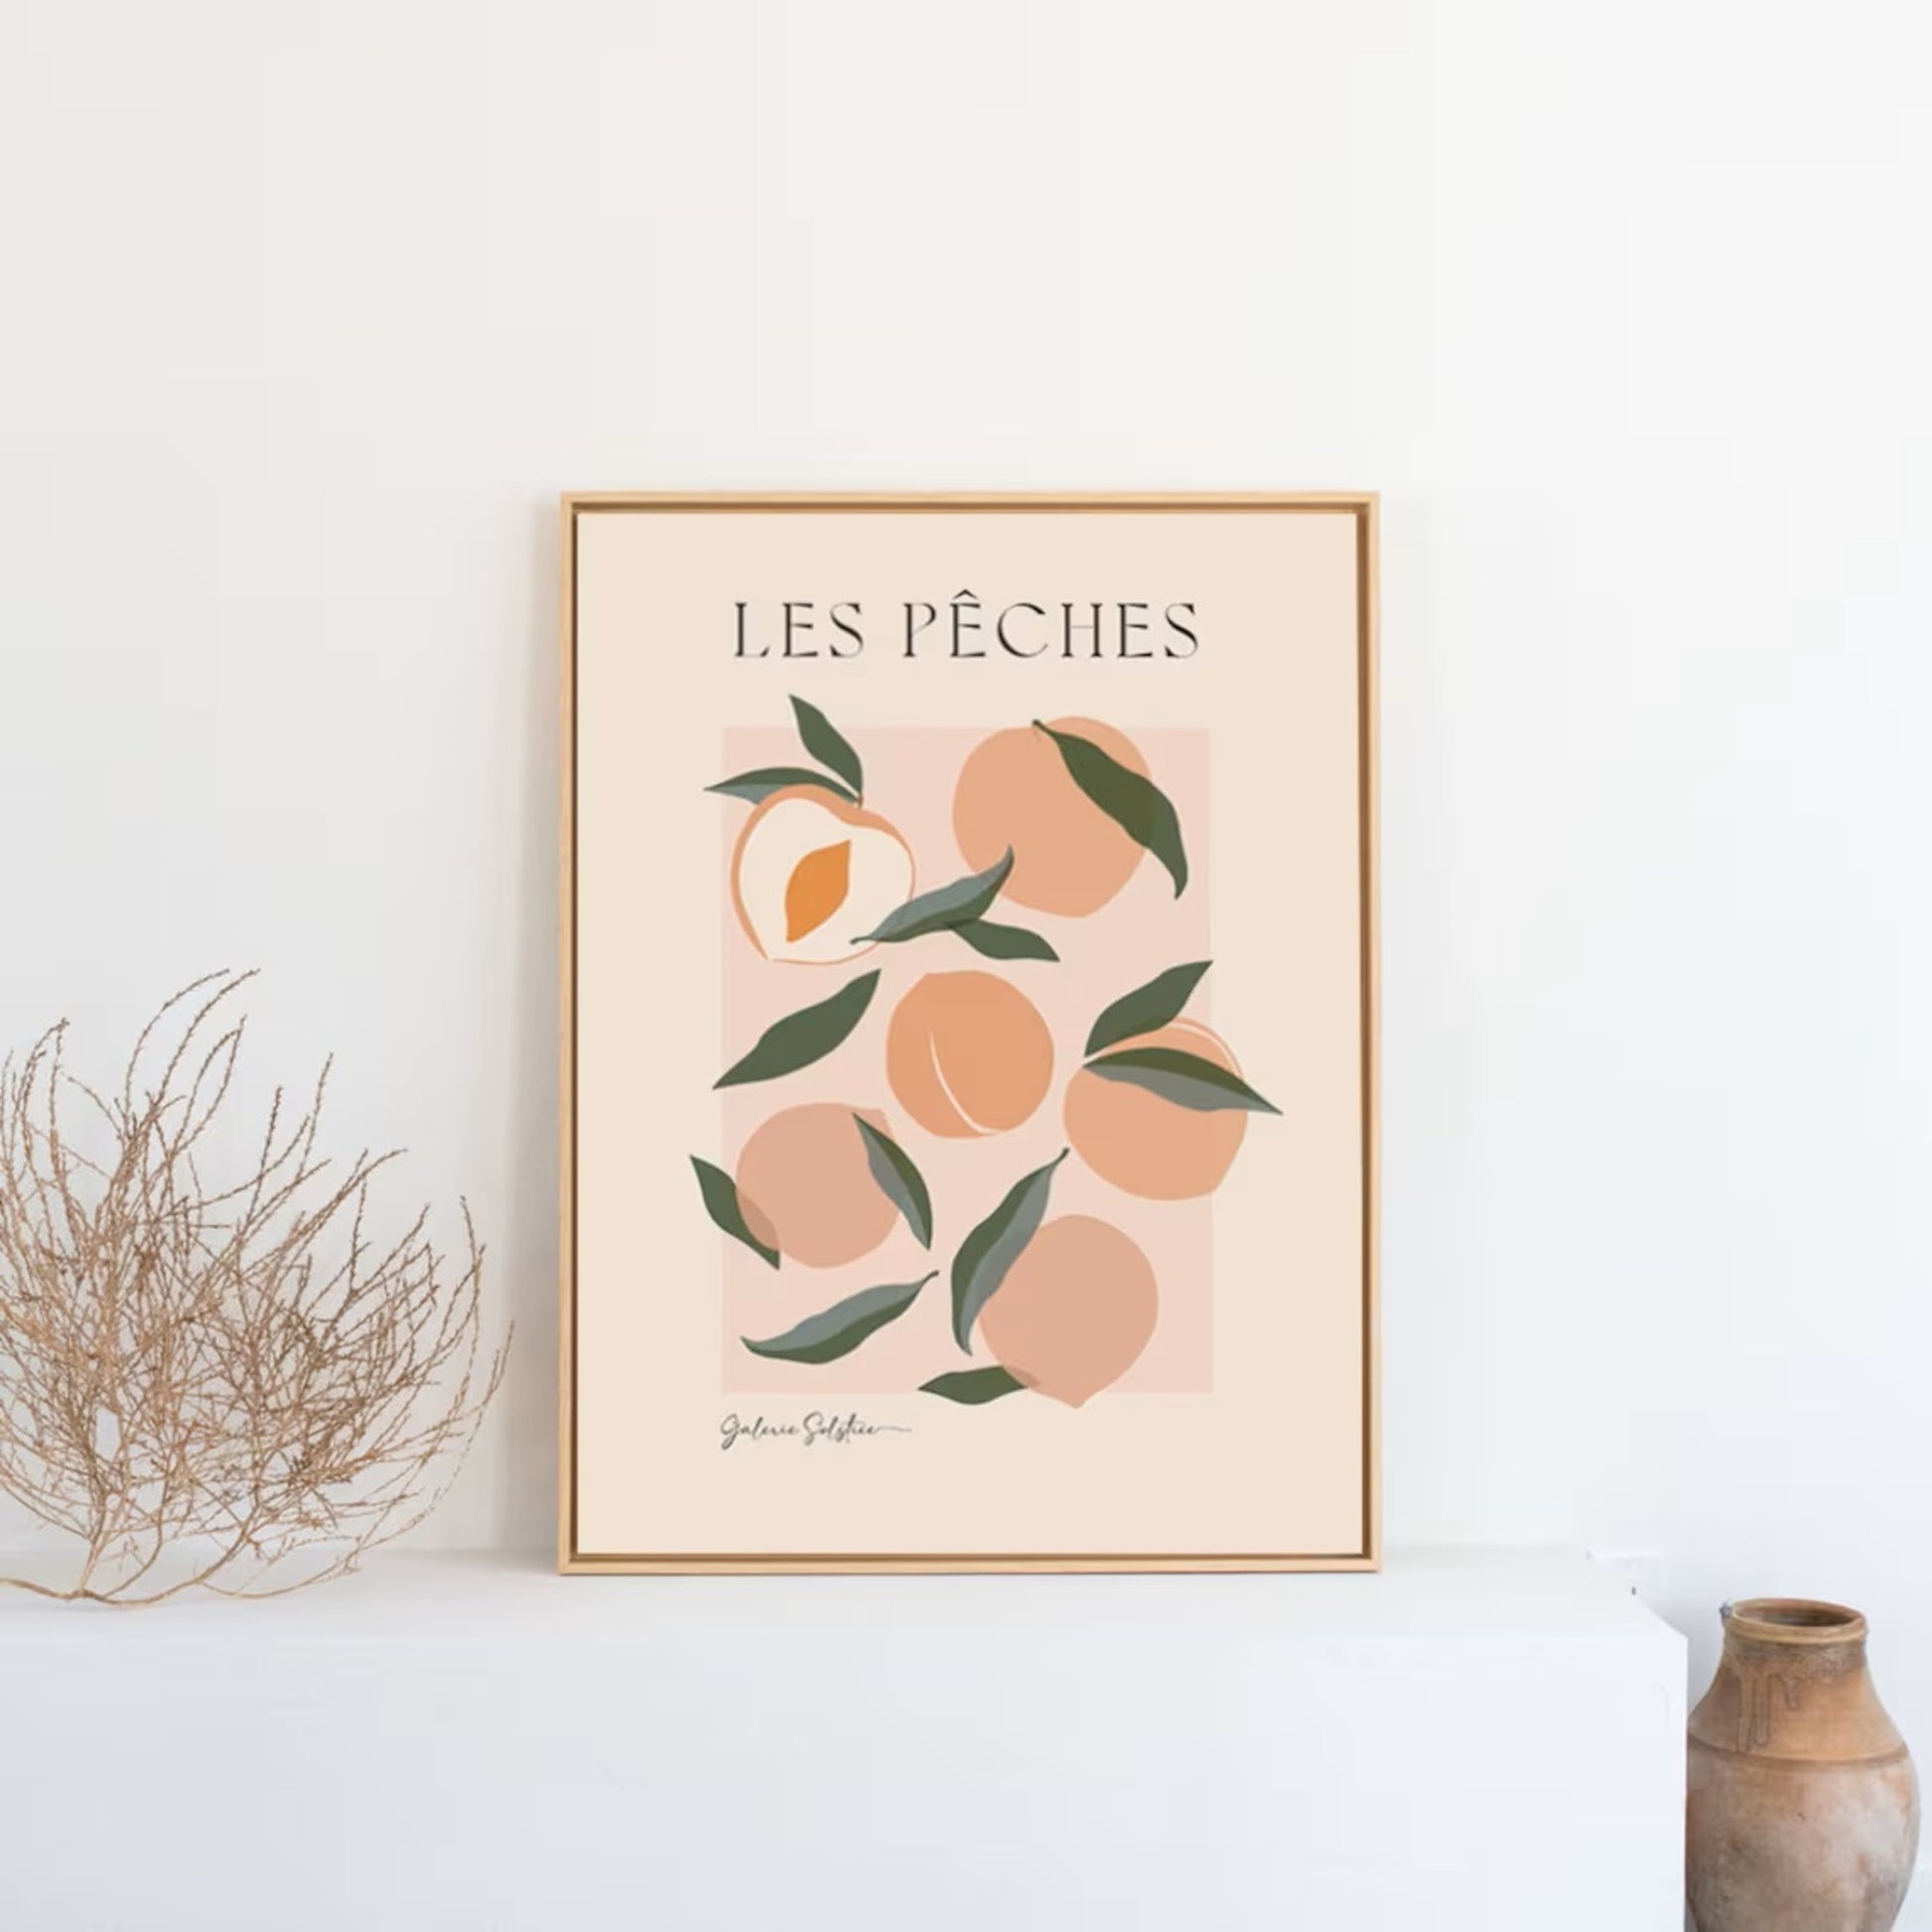 Framed print of peaches with green leaves sitting ona shelf.